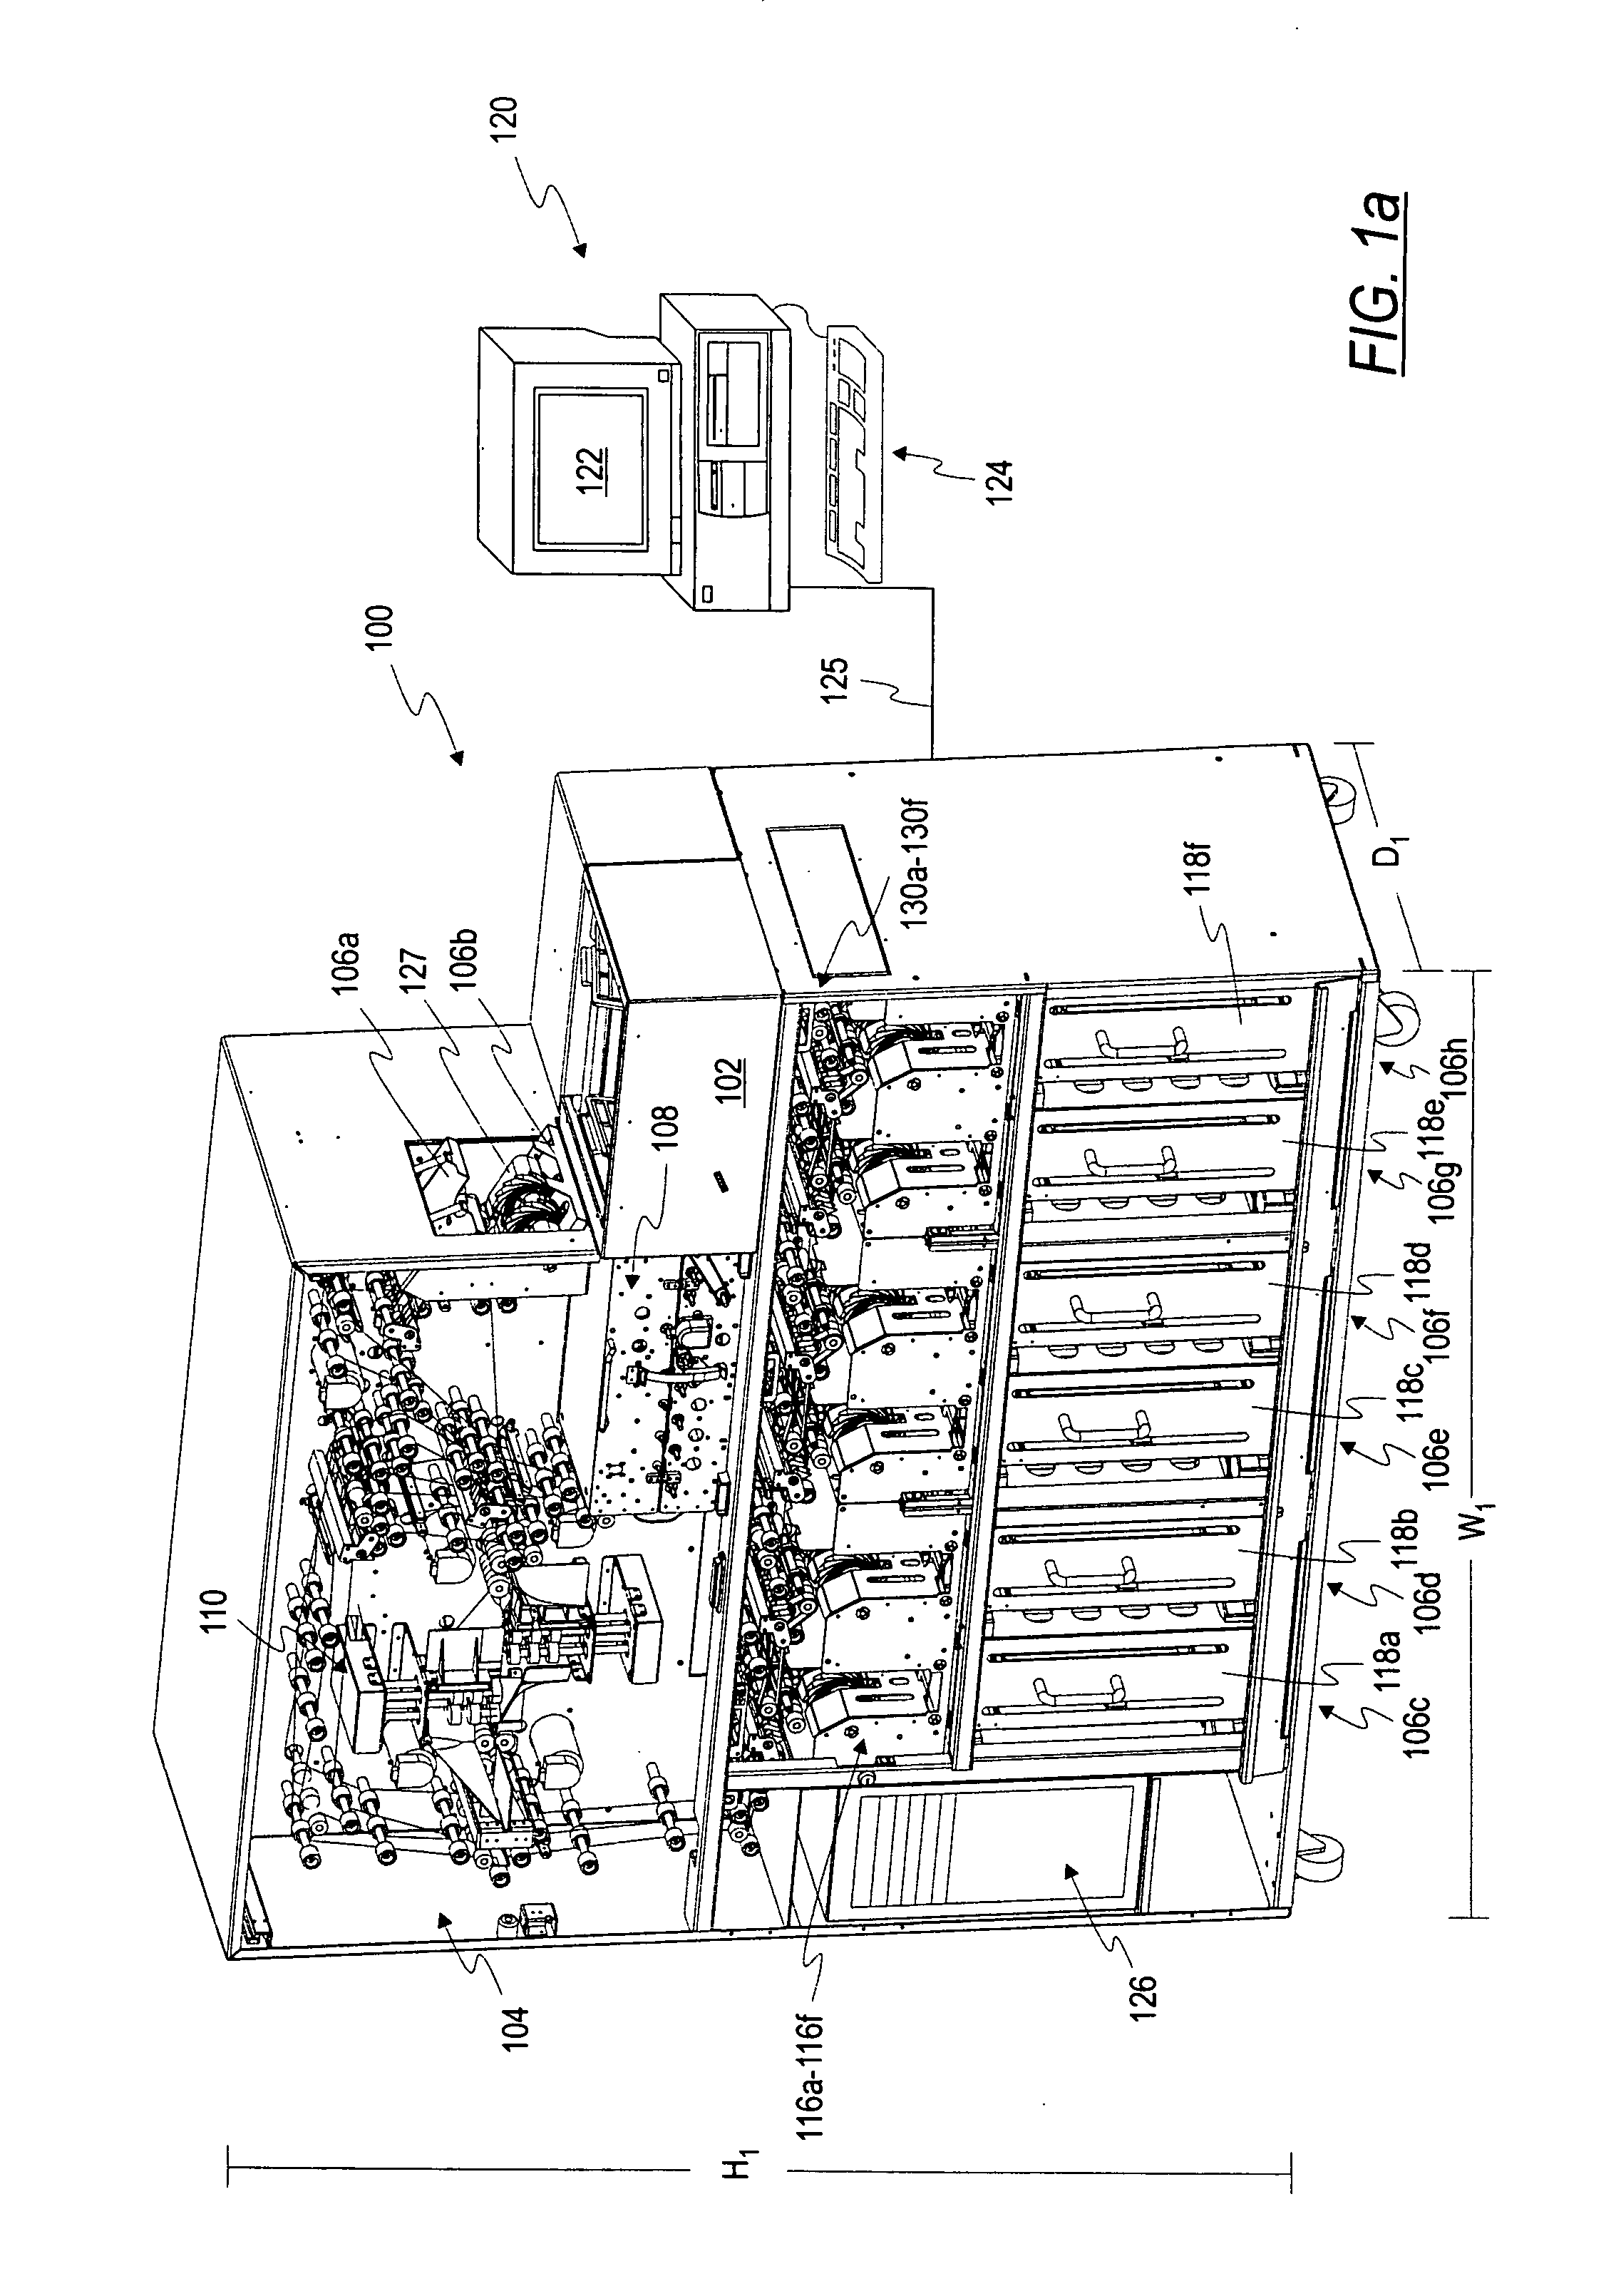 Currency processing and strapping systems and methods